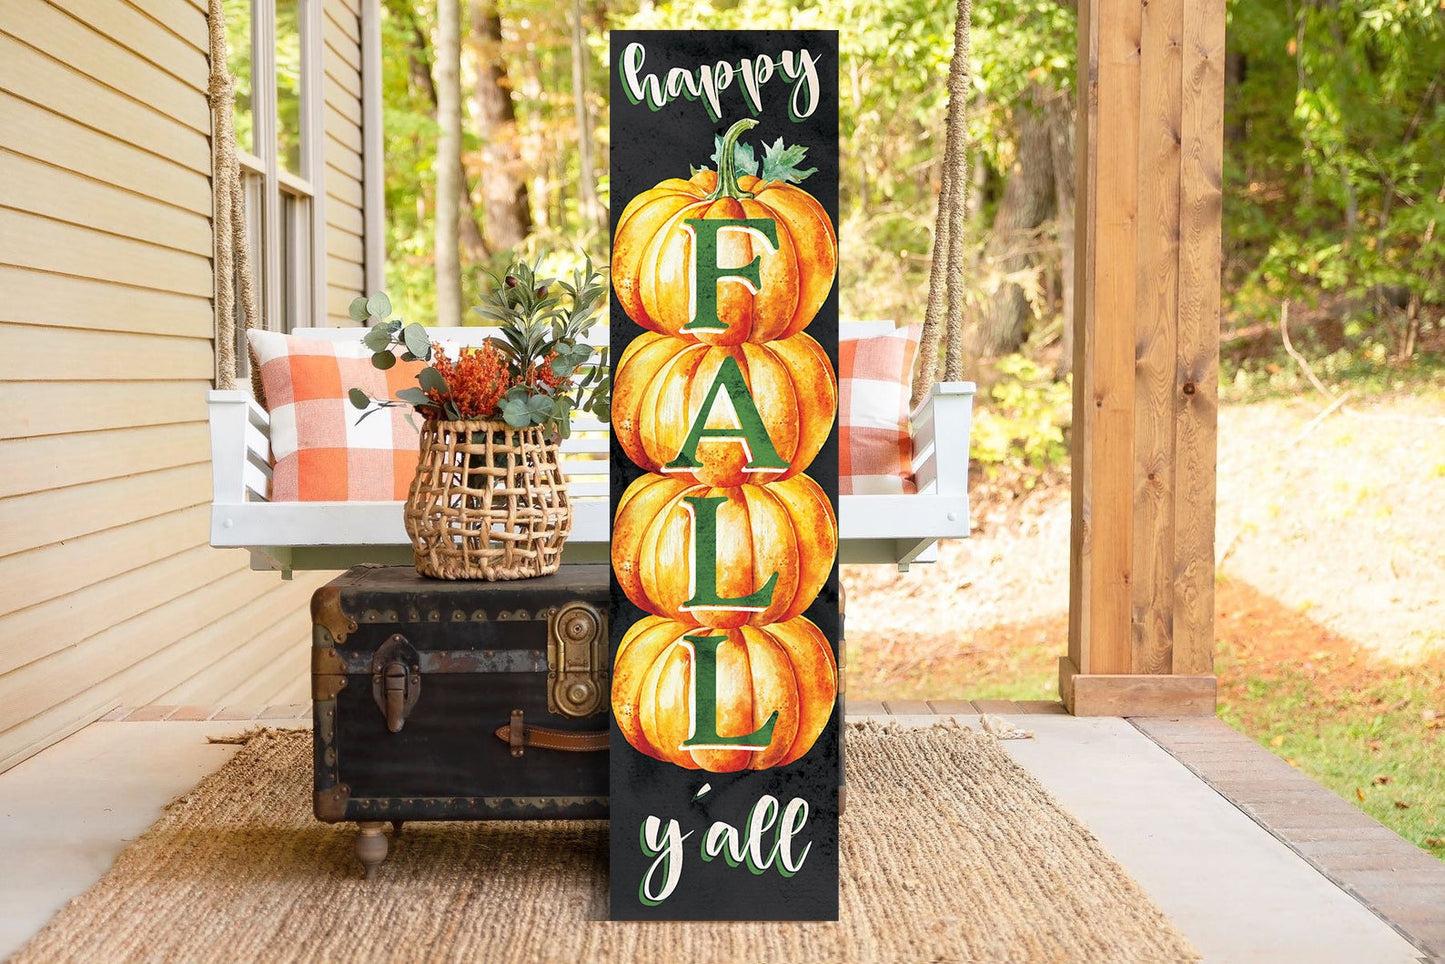 36in "Happy Fall Y'all" Wooden Porch Sign - Seasonal Front Door Decor for Autumn Celebrations